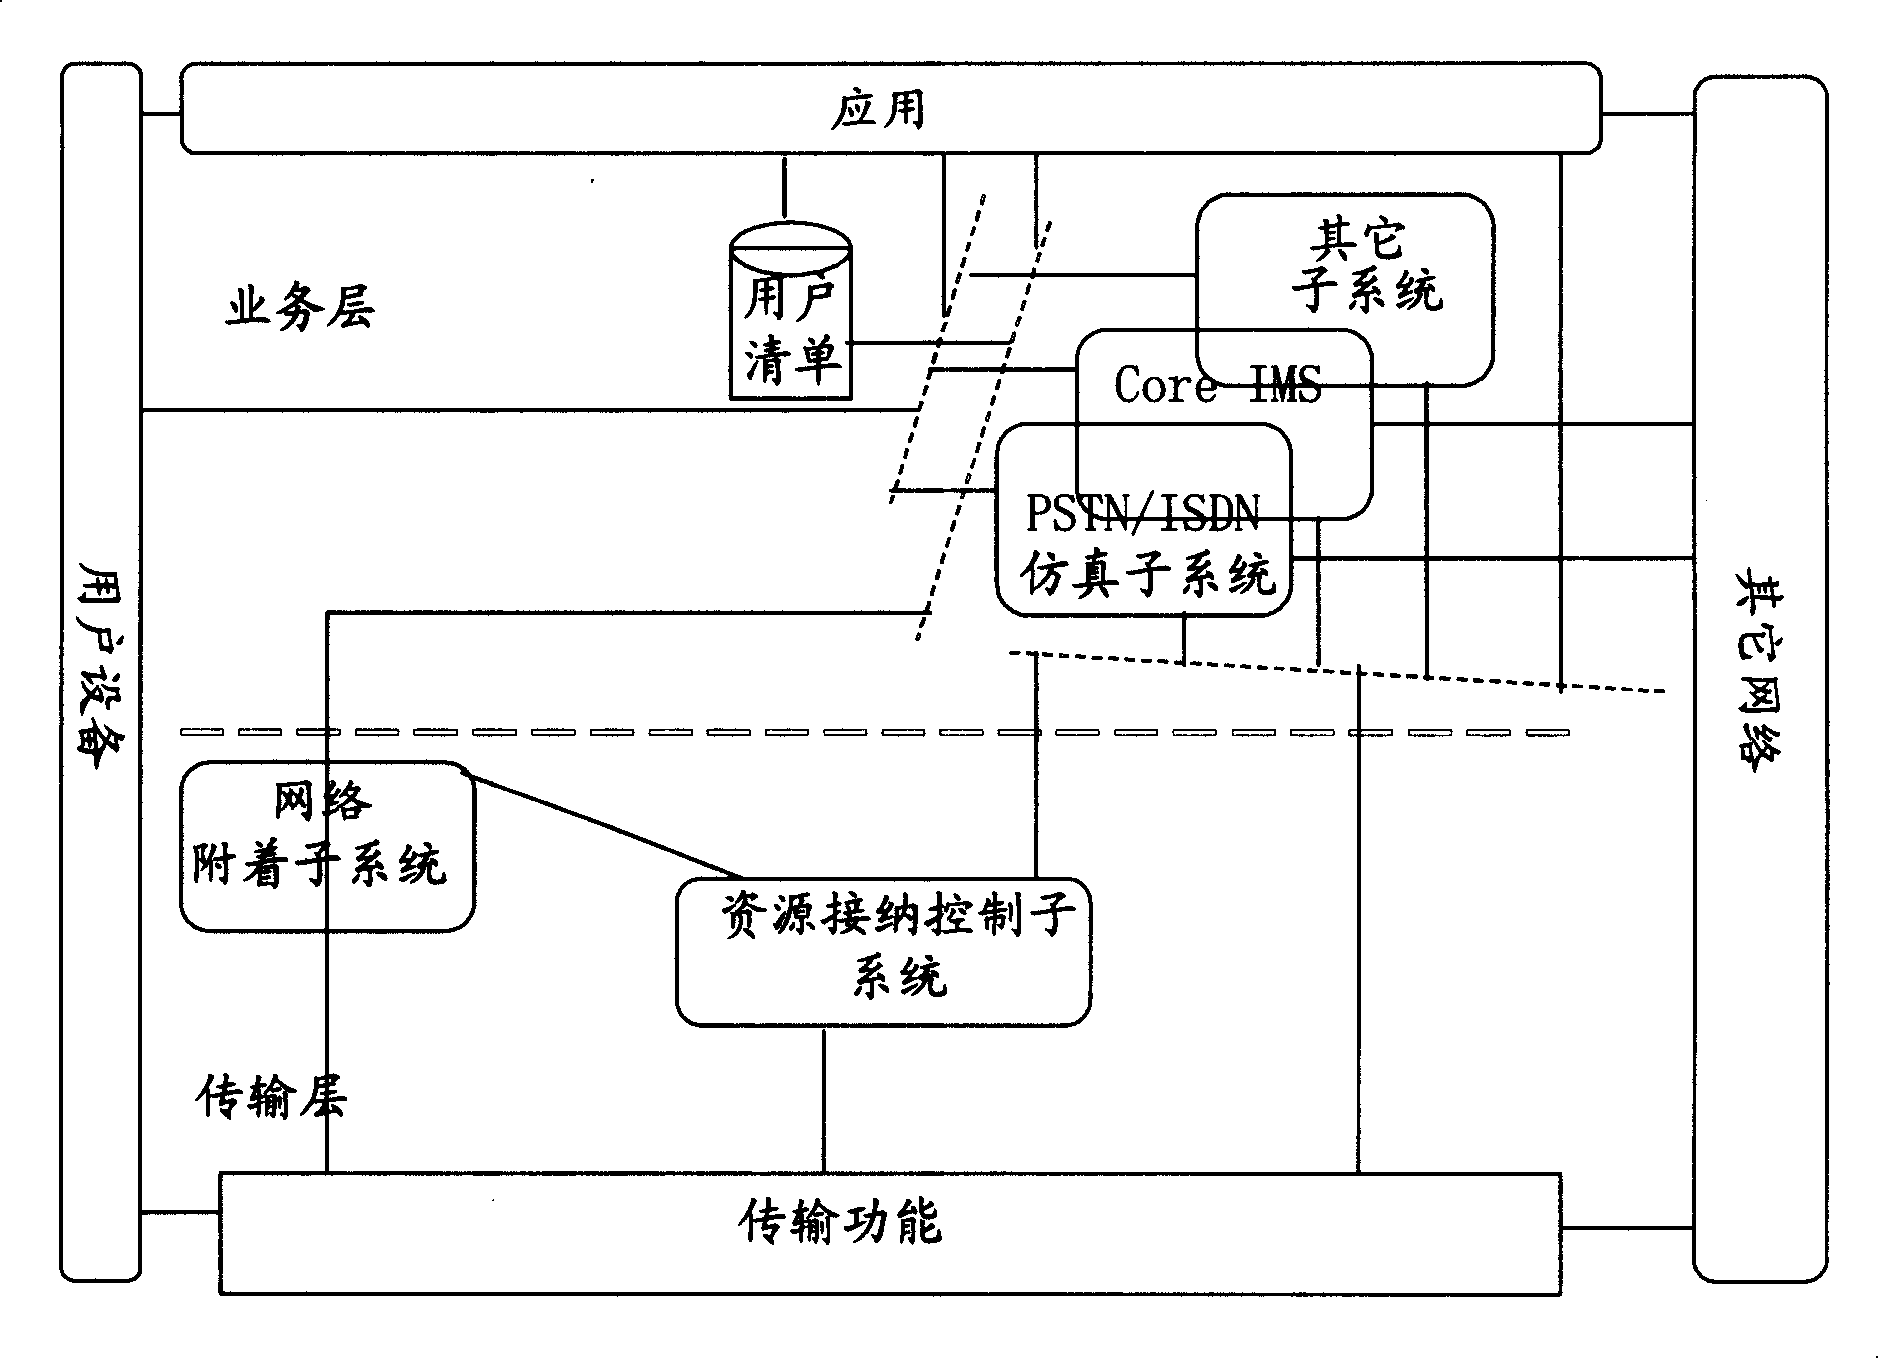 Method and system for controlling the number of user sessions